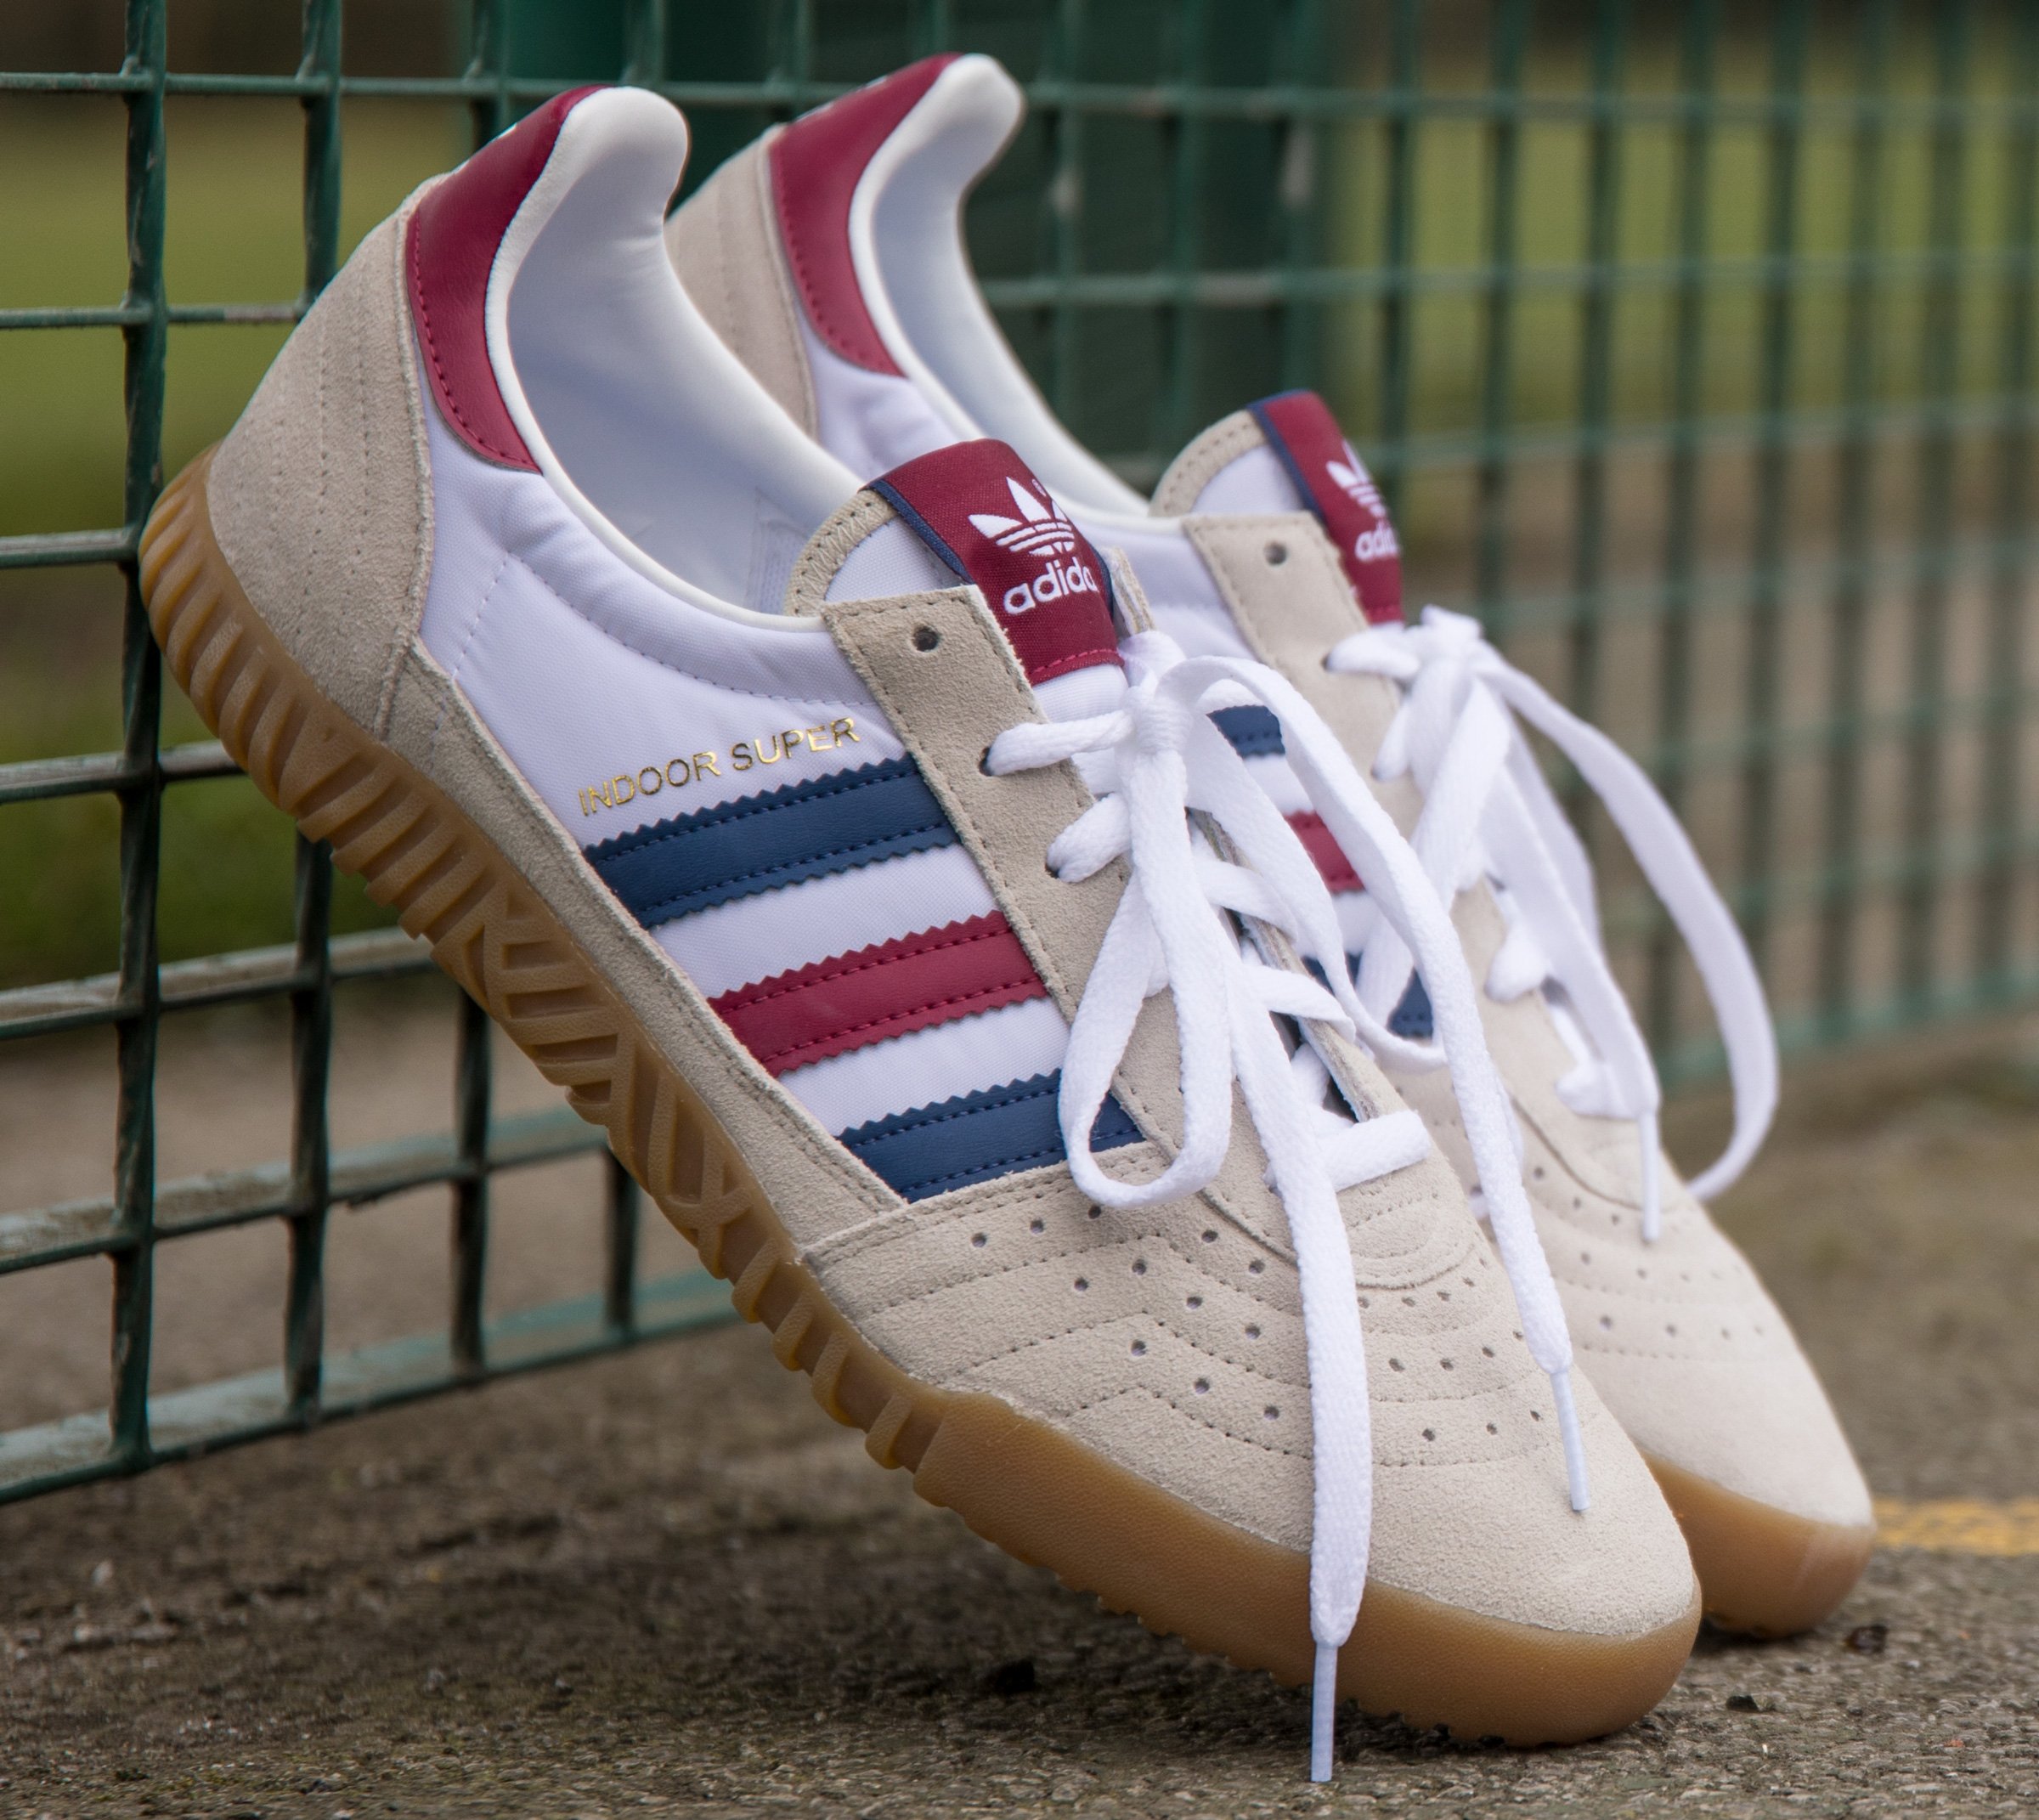 grado codicioso bostezando Stone Menswear on Twitter: "#ADIDAS CLEAR BROWN AND INDIGO INDOOR SUPER  TRAINERS has shown its true colours by shining through as a classic and  traditional shape worn by the casual masses and